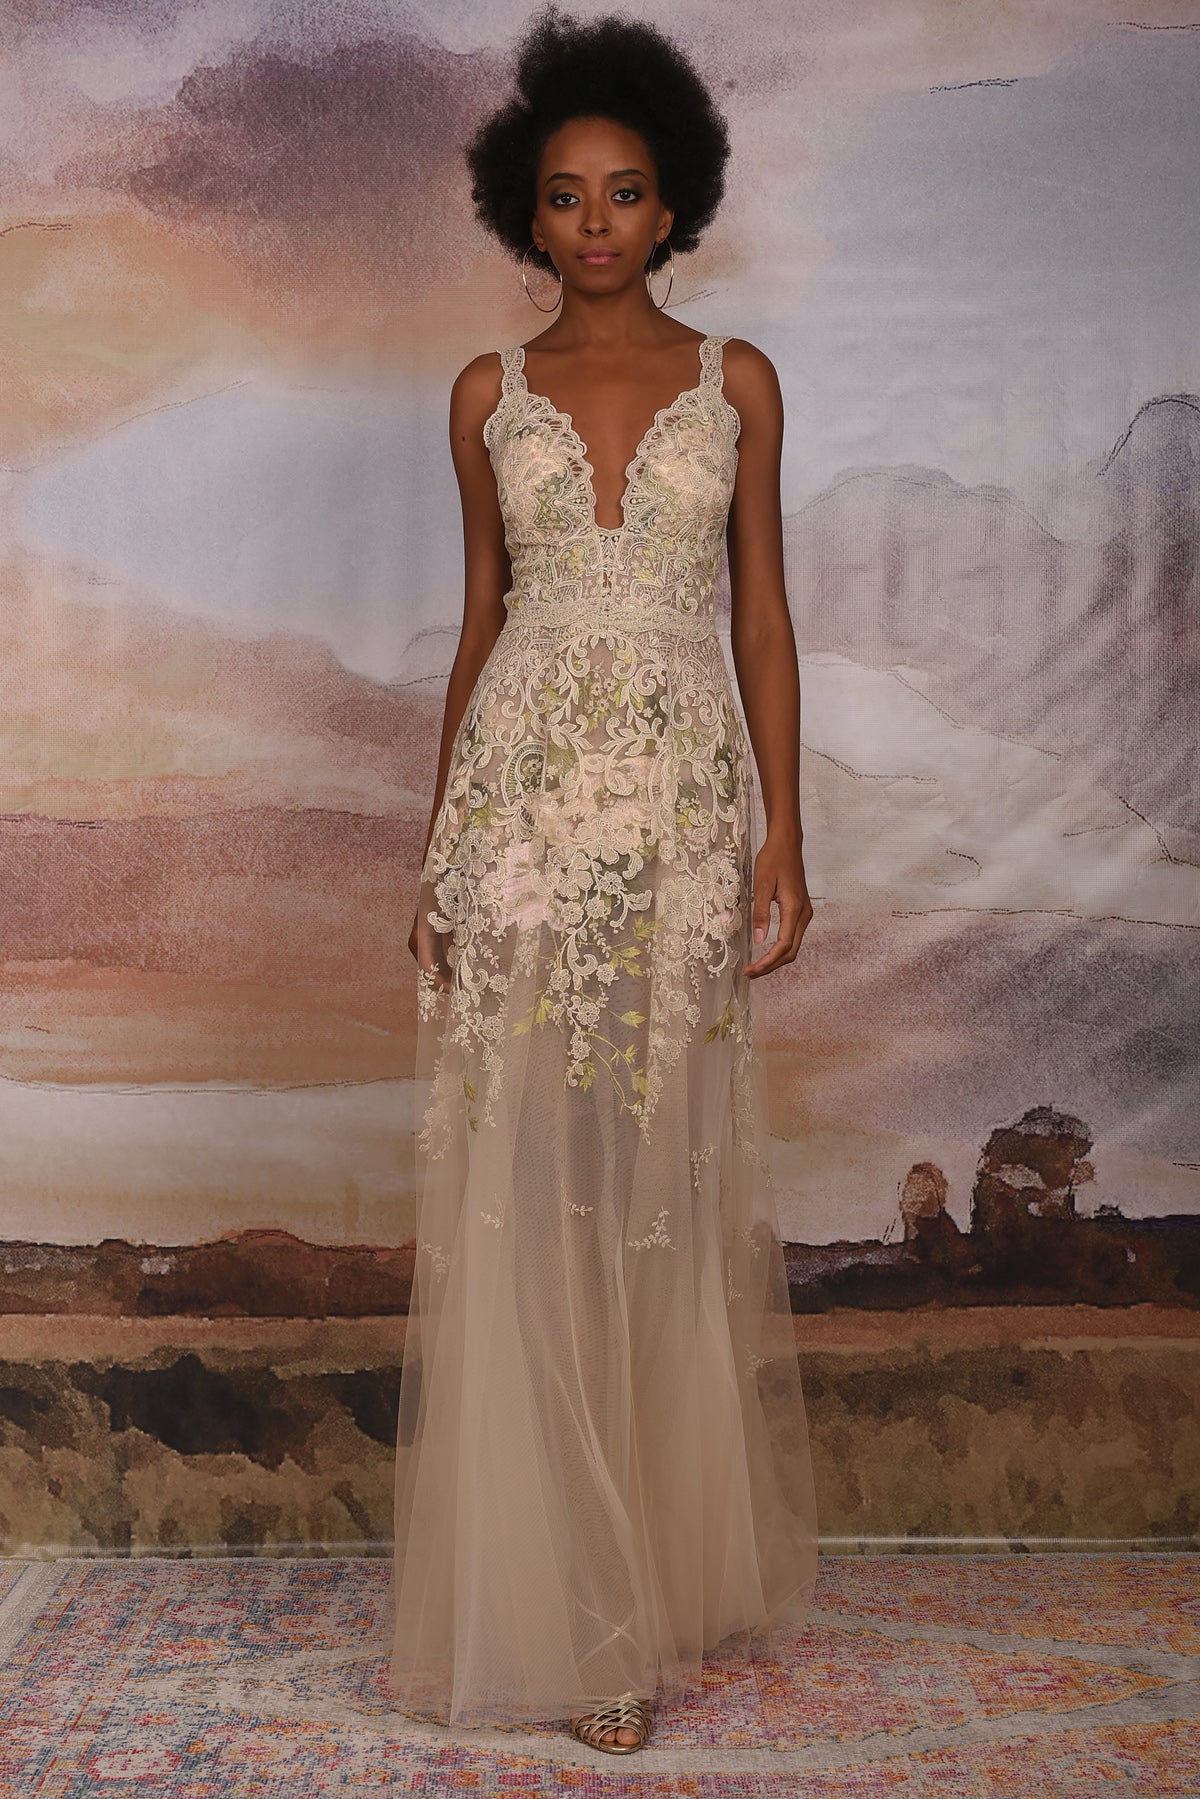 Desert Rose Wedding Dress  Luxurious Lace and Embroidery